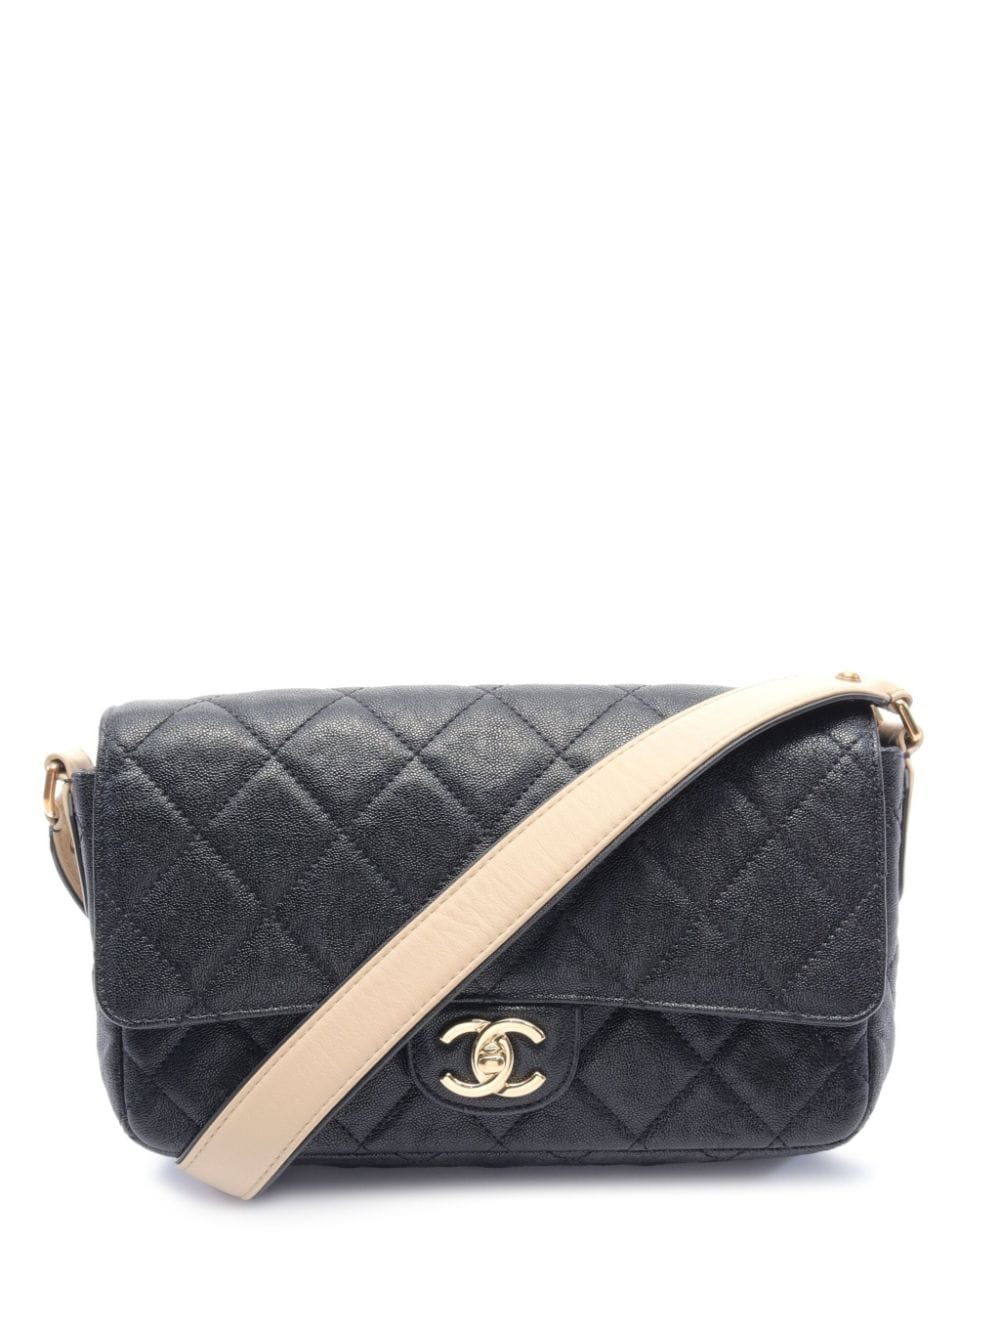 CHANEL Pre-Owned 2021-2022 Classic Flap crossbody bag - Black